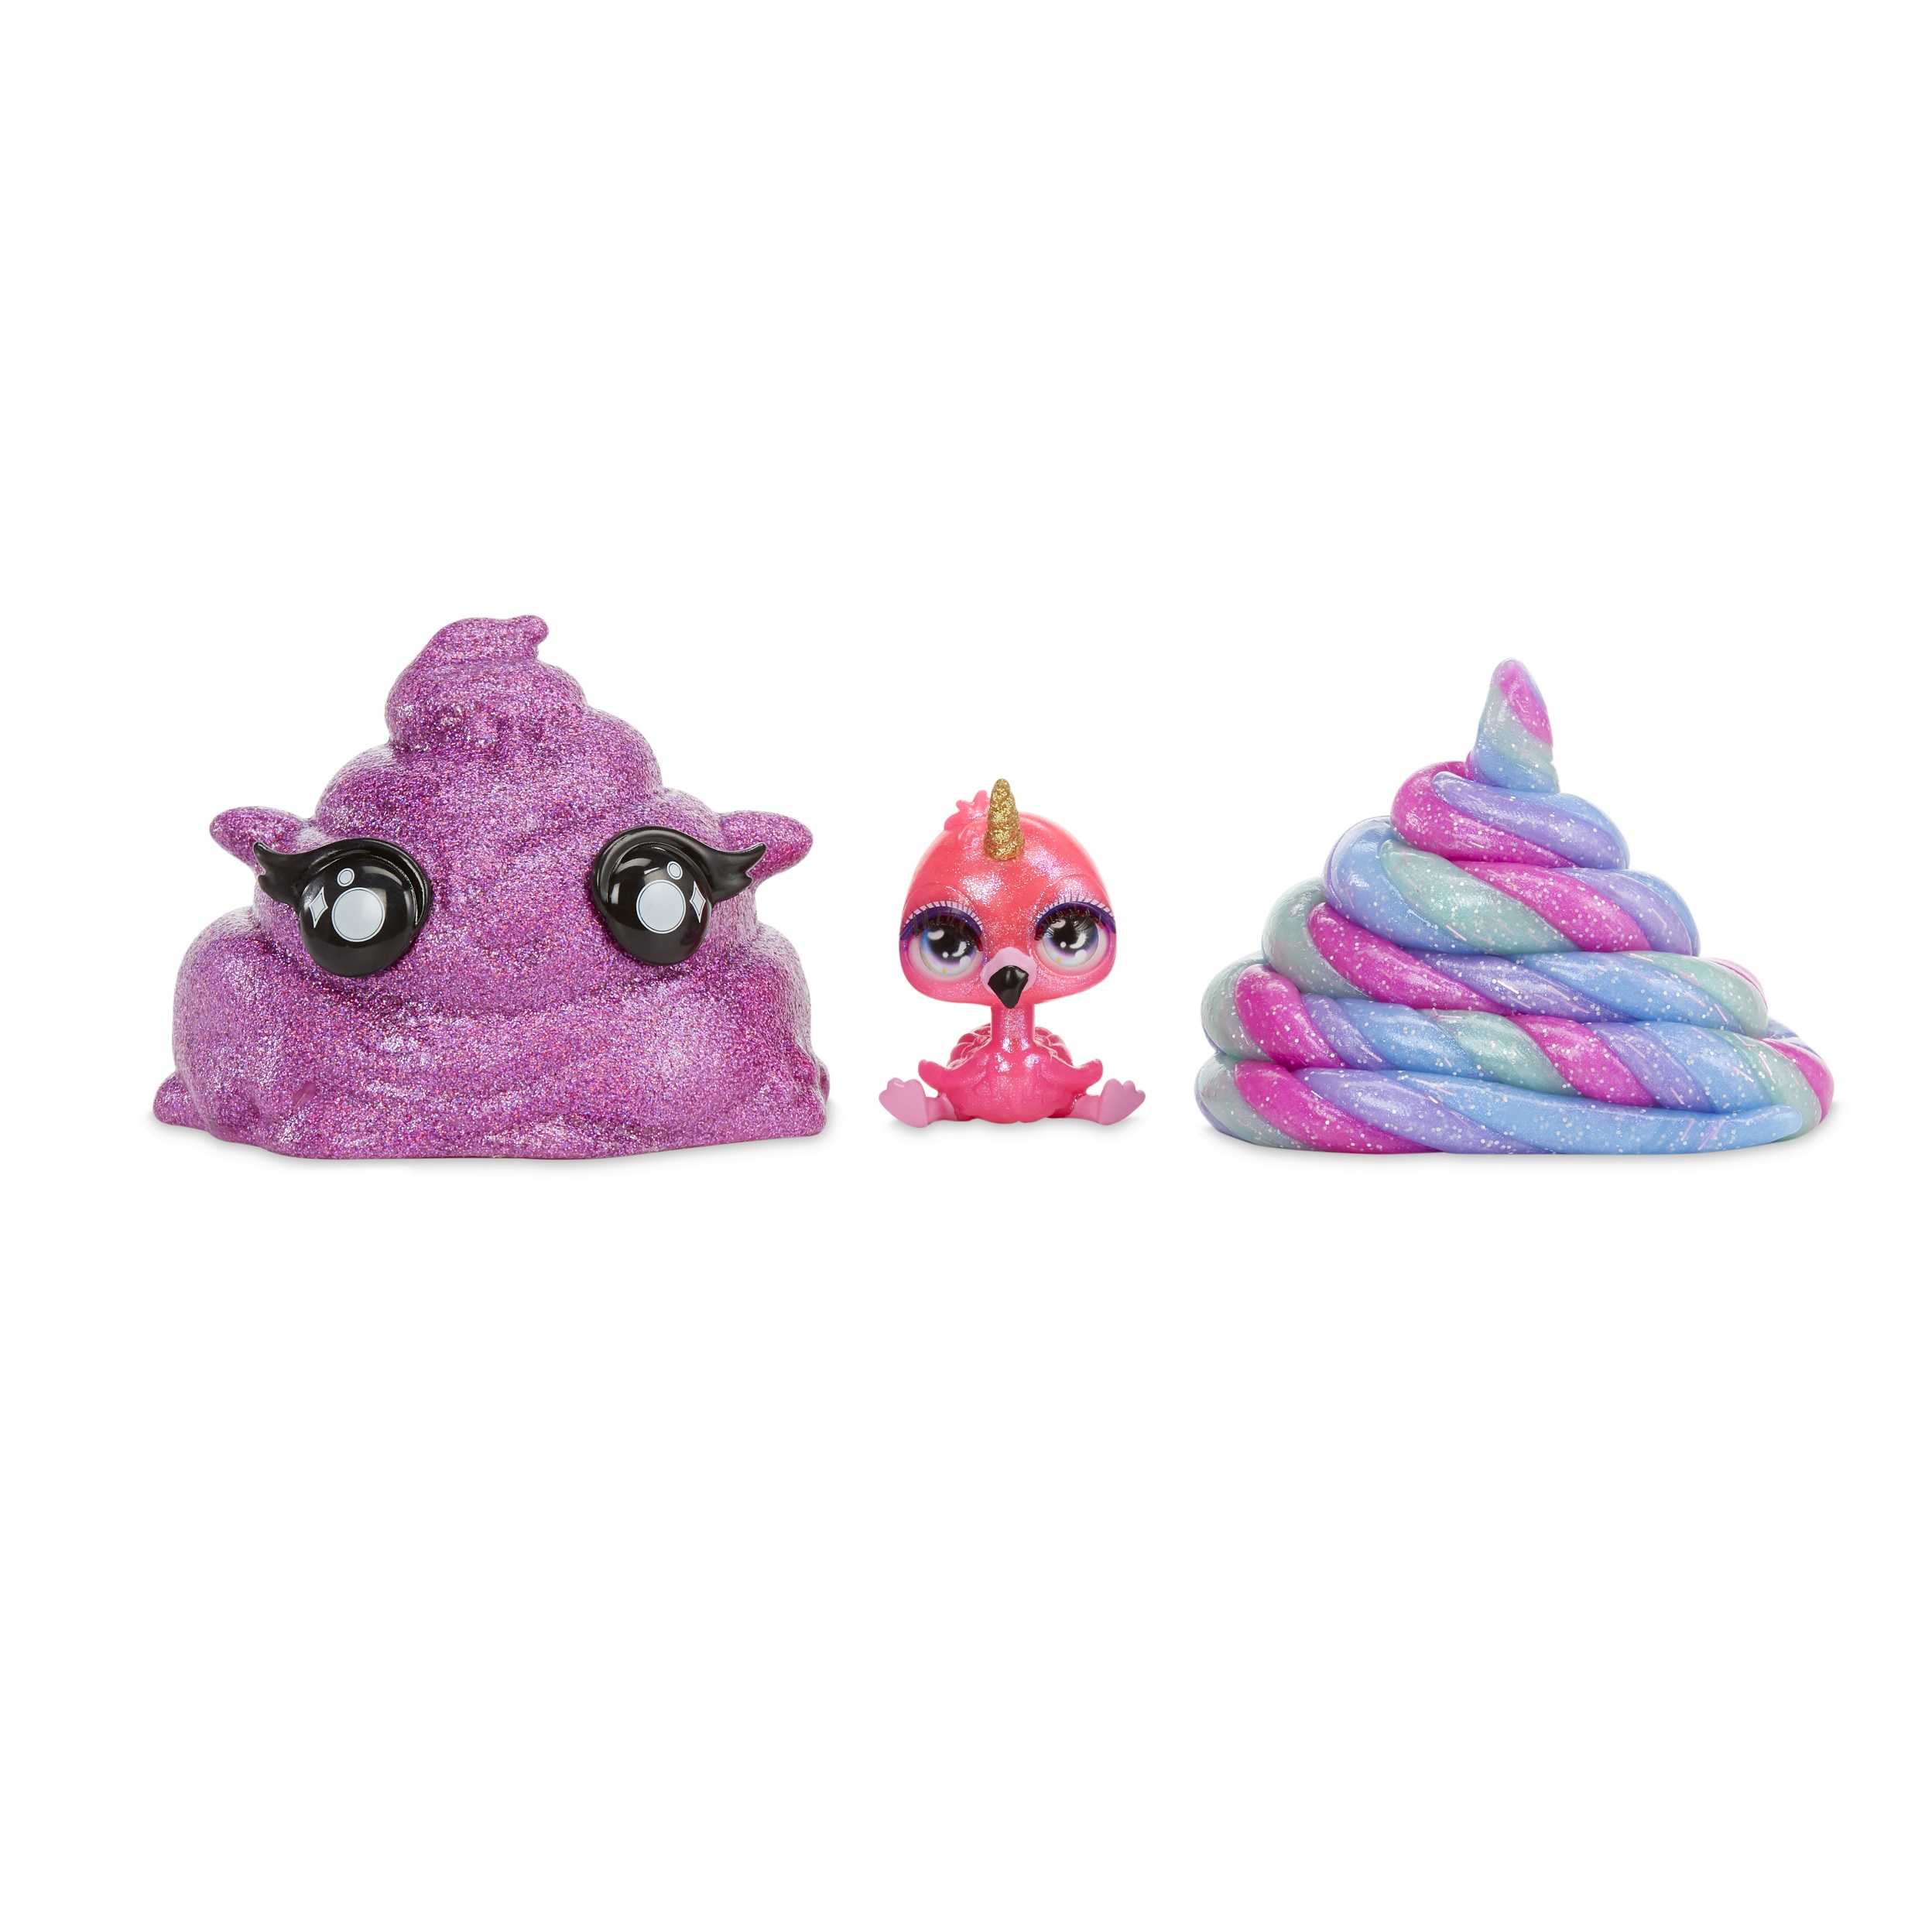 Poopsie Cutie Tooties Surprise Collectible Slime & Mystery Character Wave 2 - image 4 of 6